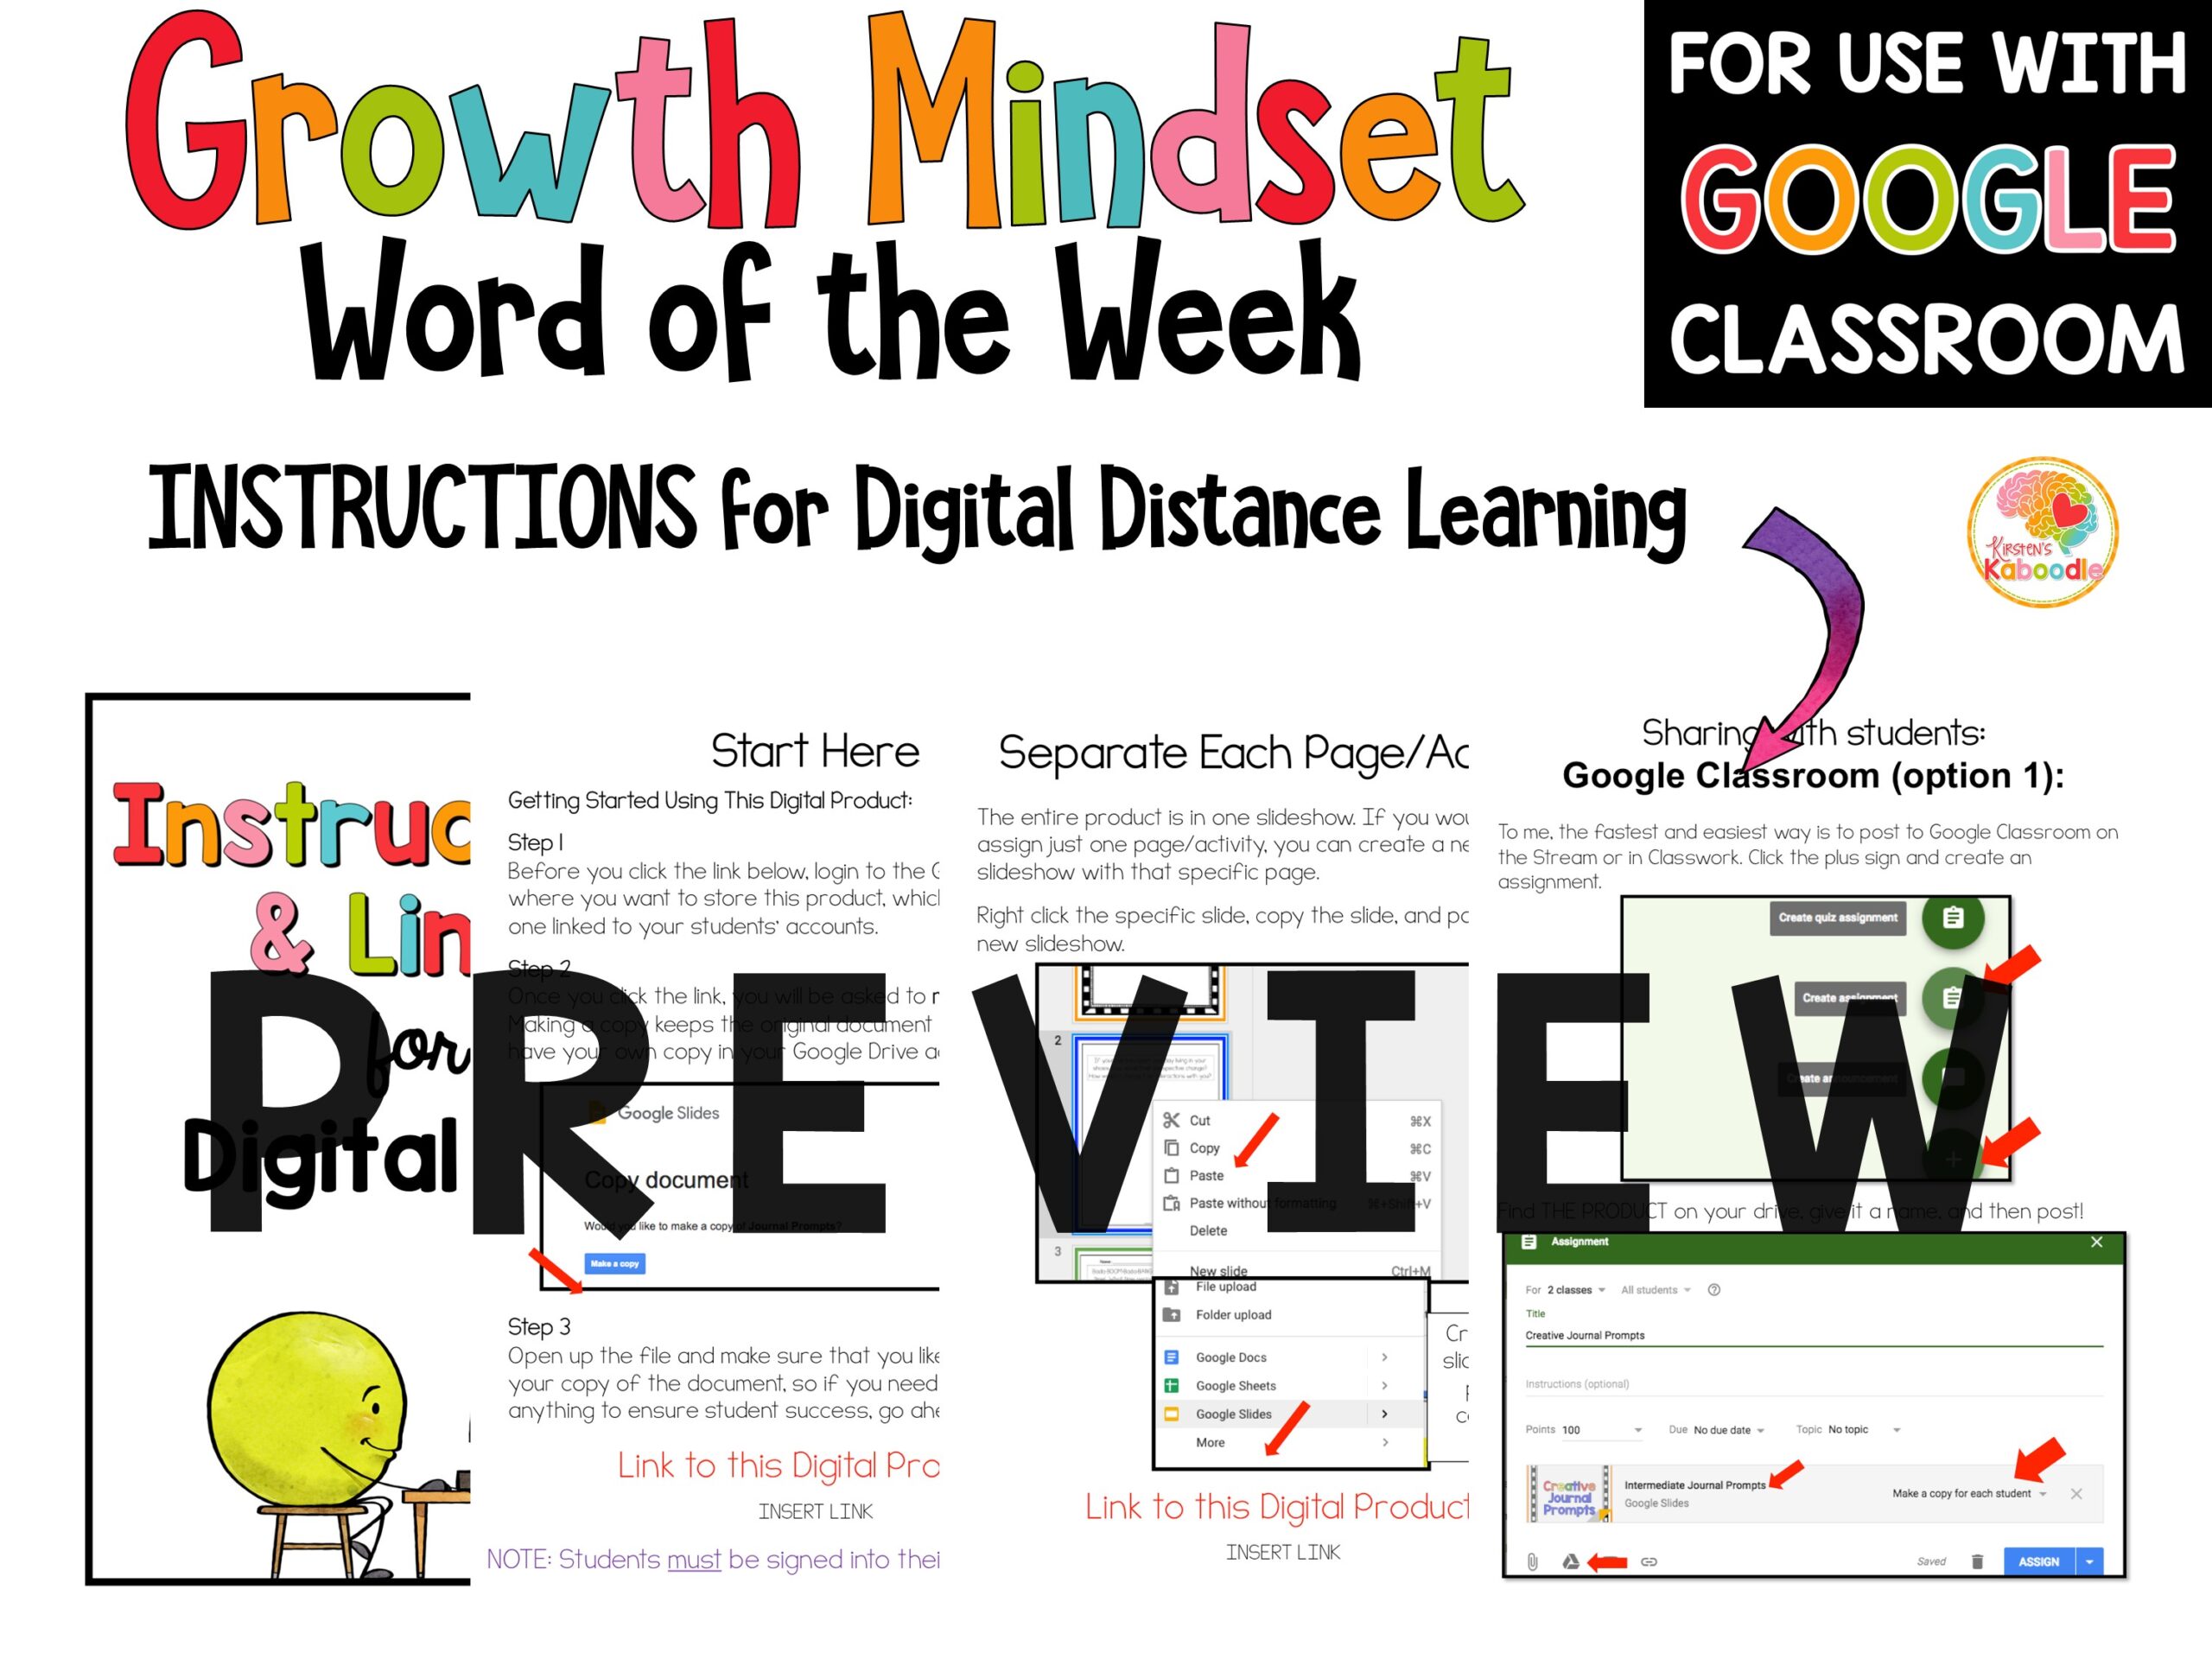 growth-mindset-word-of-the-week